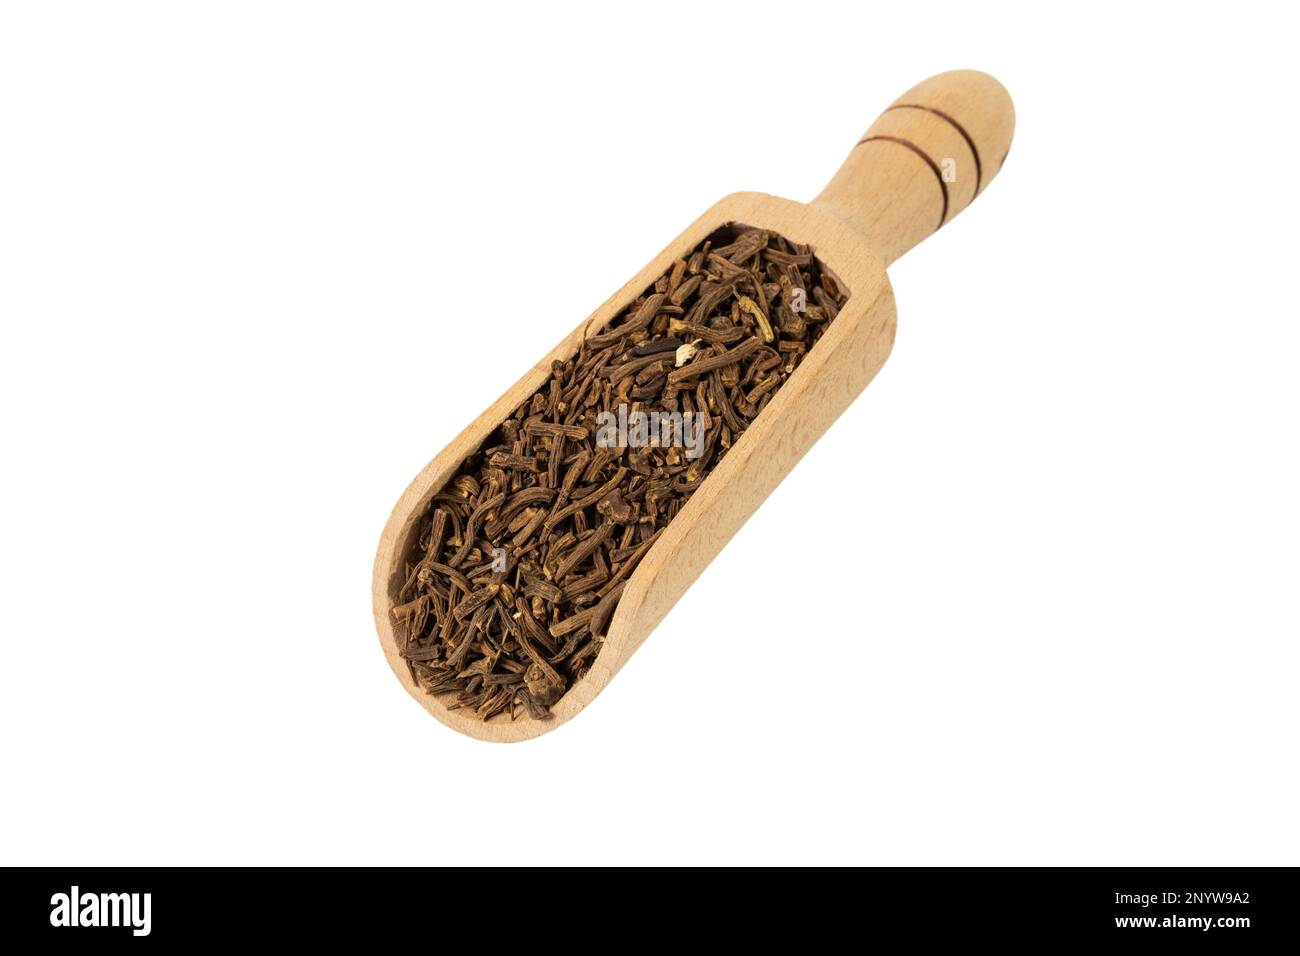 Valerian herb root  in wooden scoop isolated on white background. Valeriana officinalis. used in herbal medicine as a tranquillizer and to treat insom Stock Photo